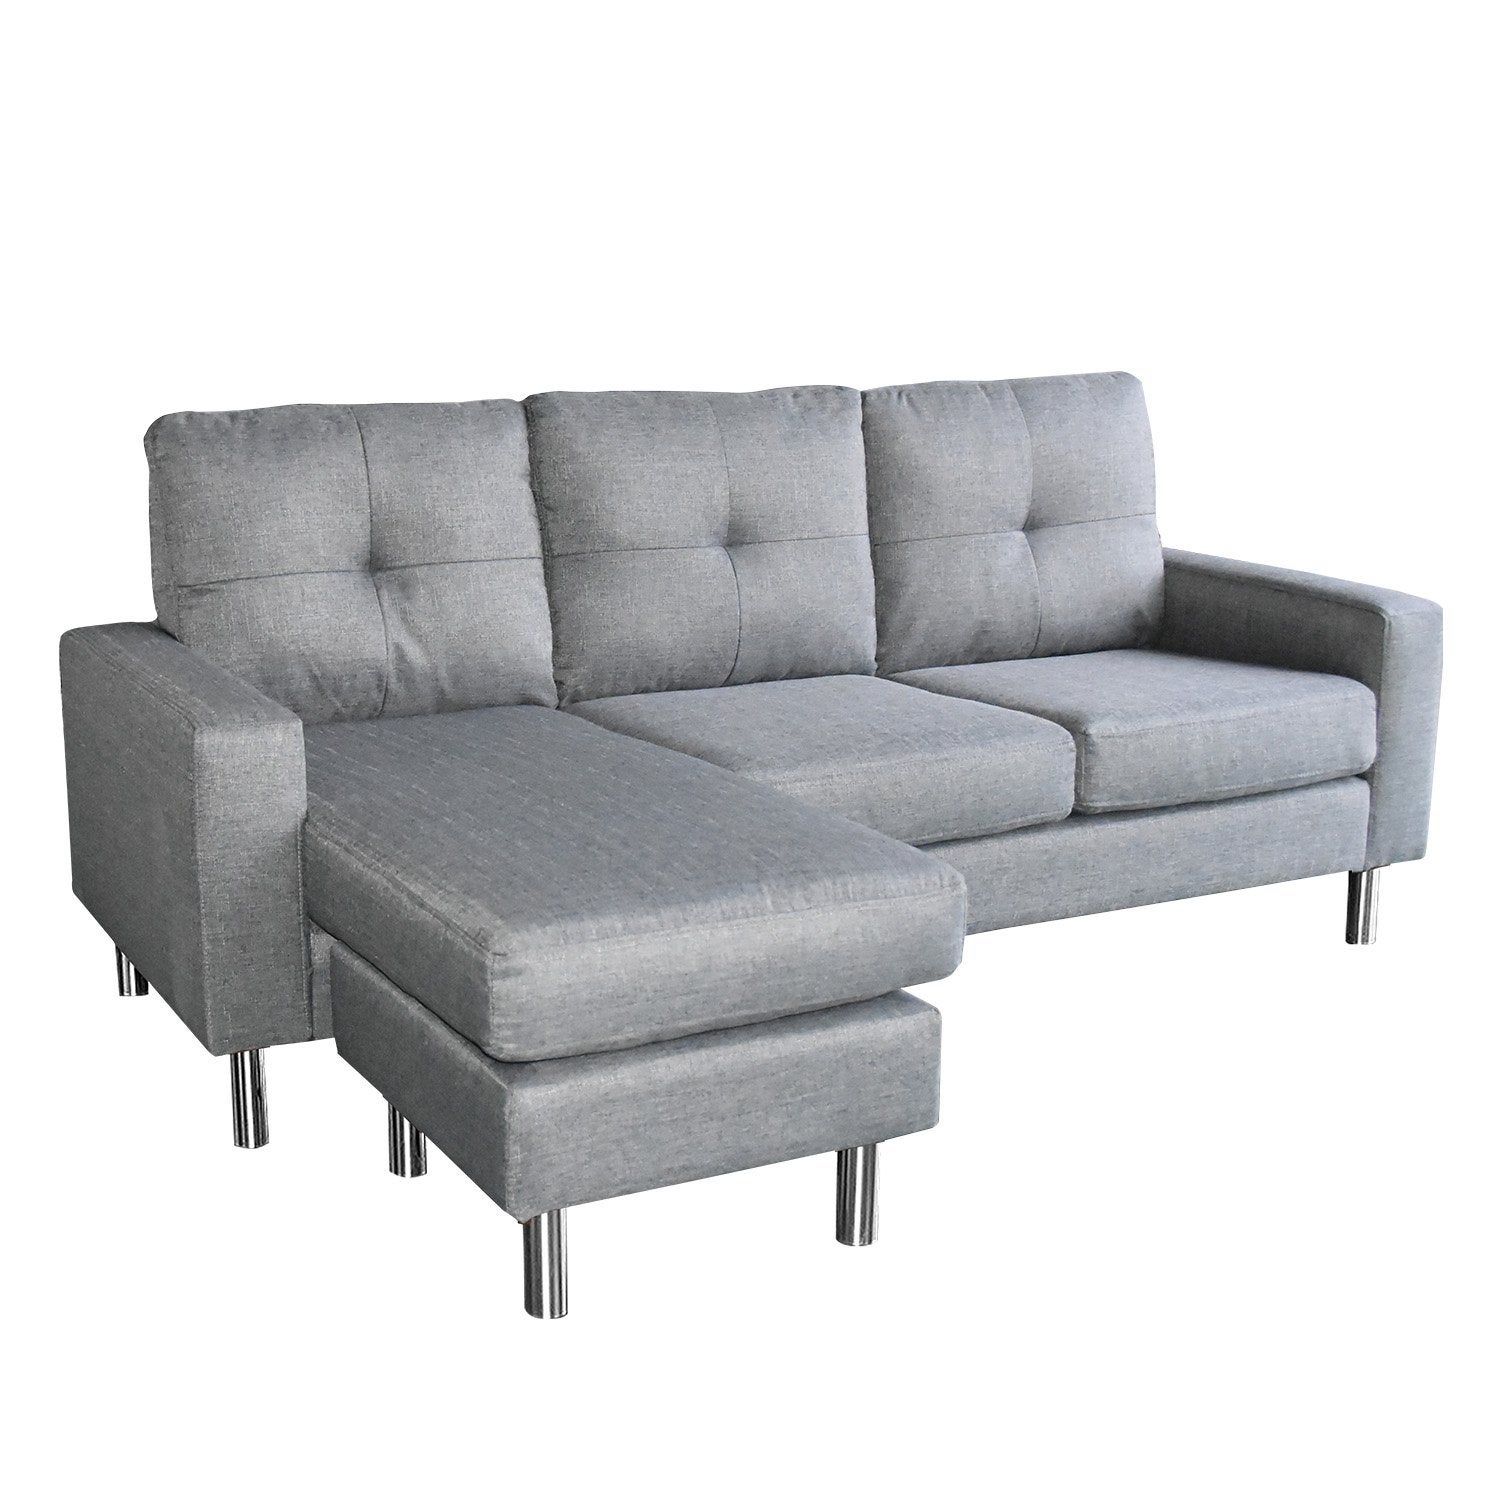 Sarantino Adjustable Linen Corner Sofa Lounge Couch Modular Furniture L Chair Home Chaise Grey